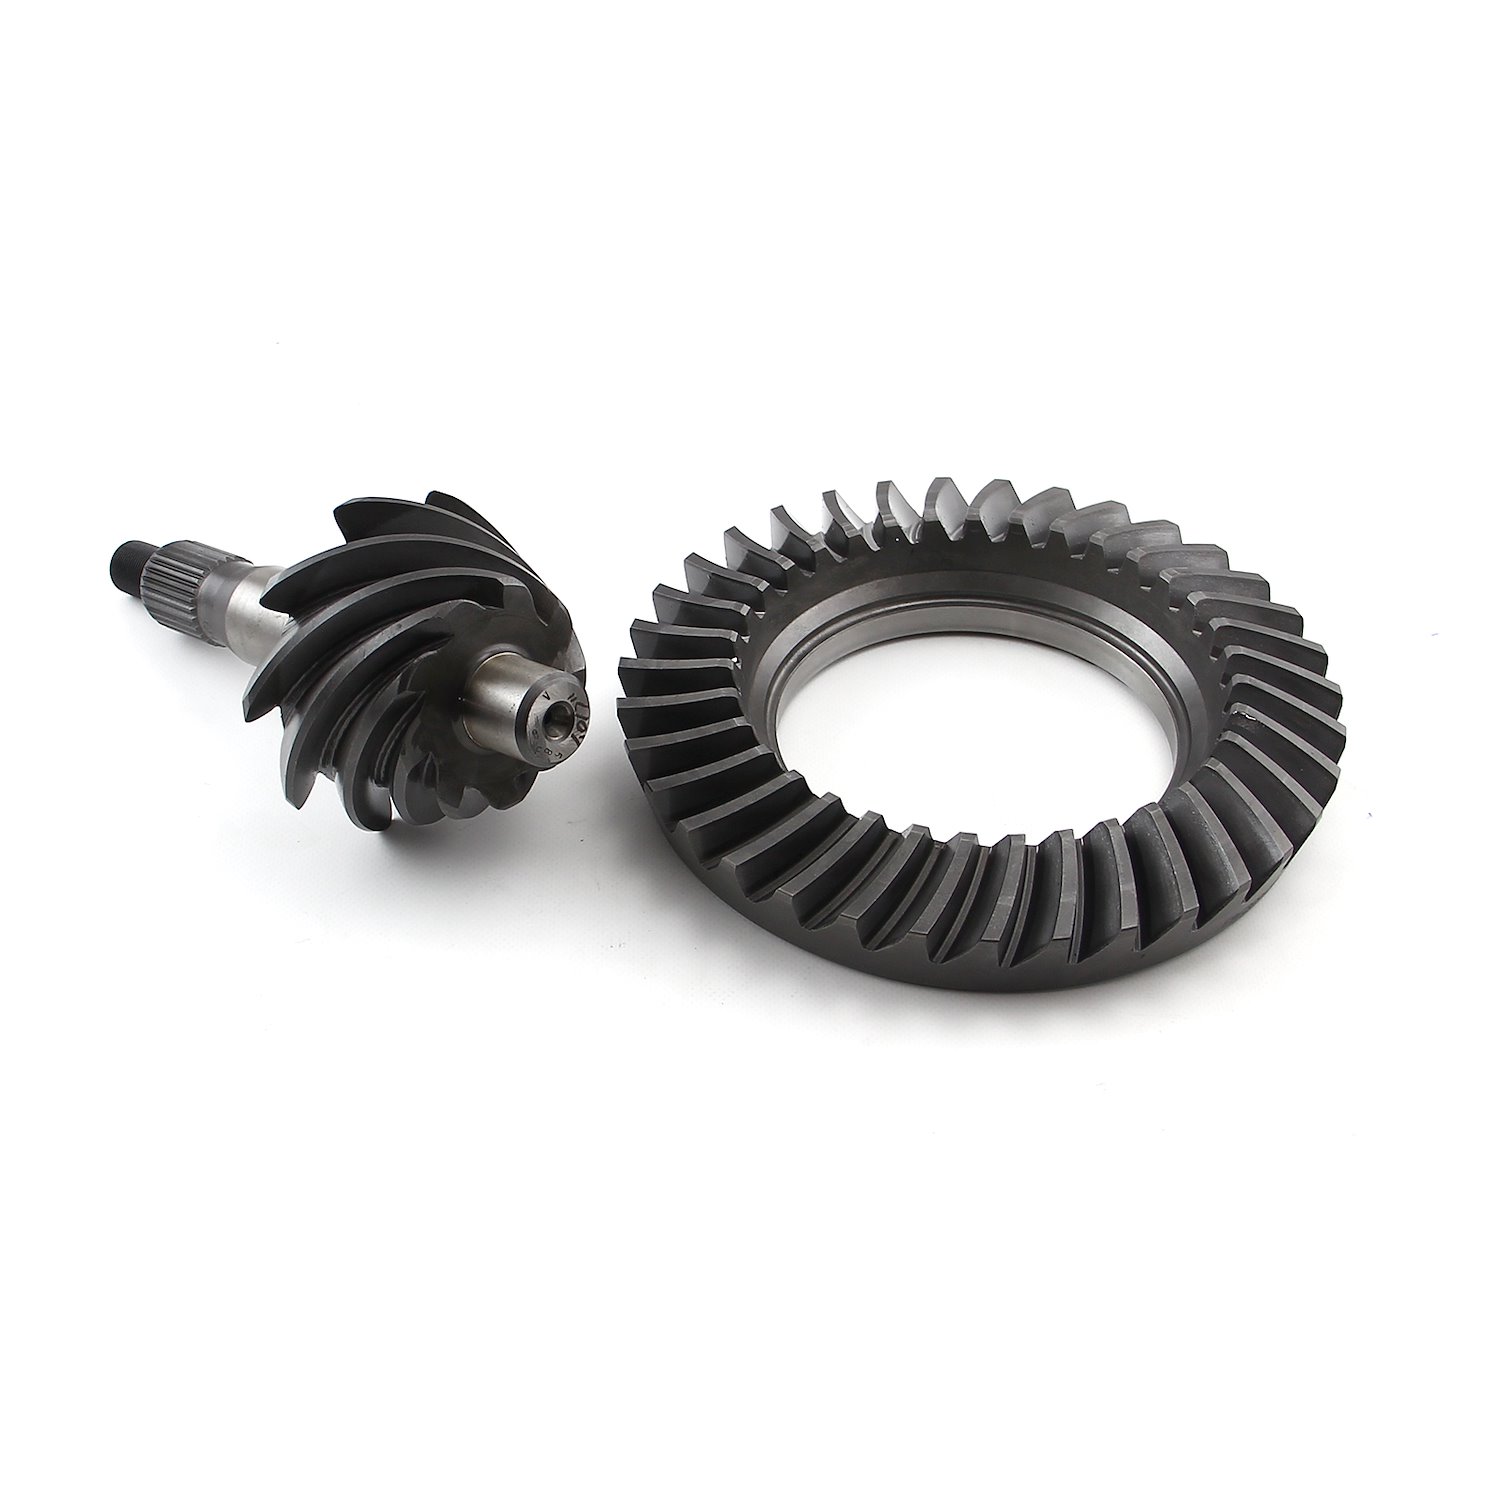 4.88 28 SPLINE FORD 9 RING AND PINION SET 8620